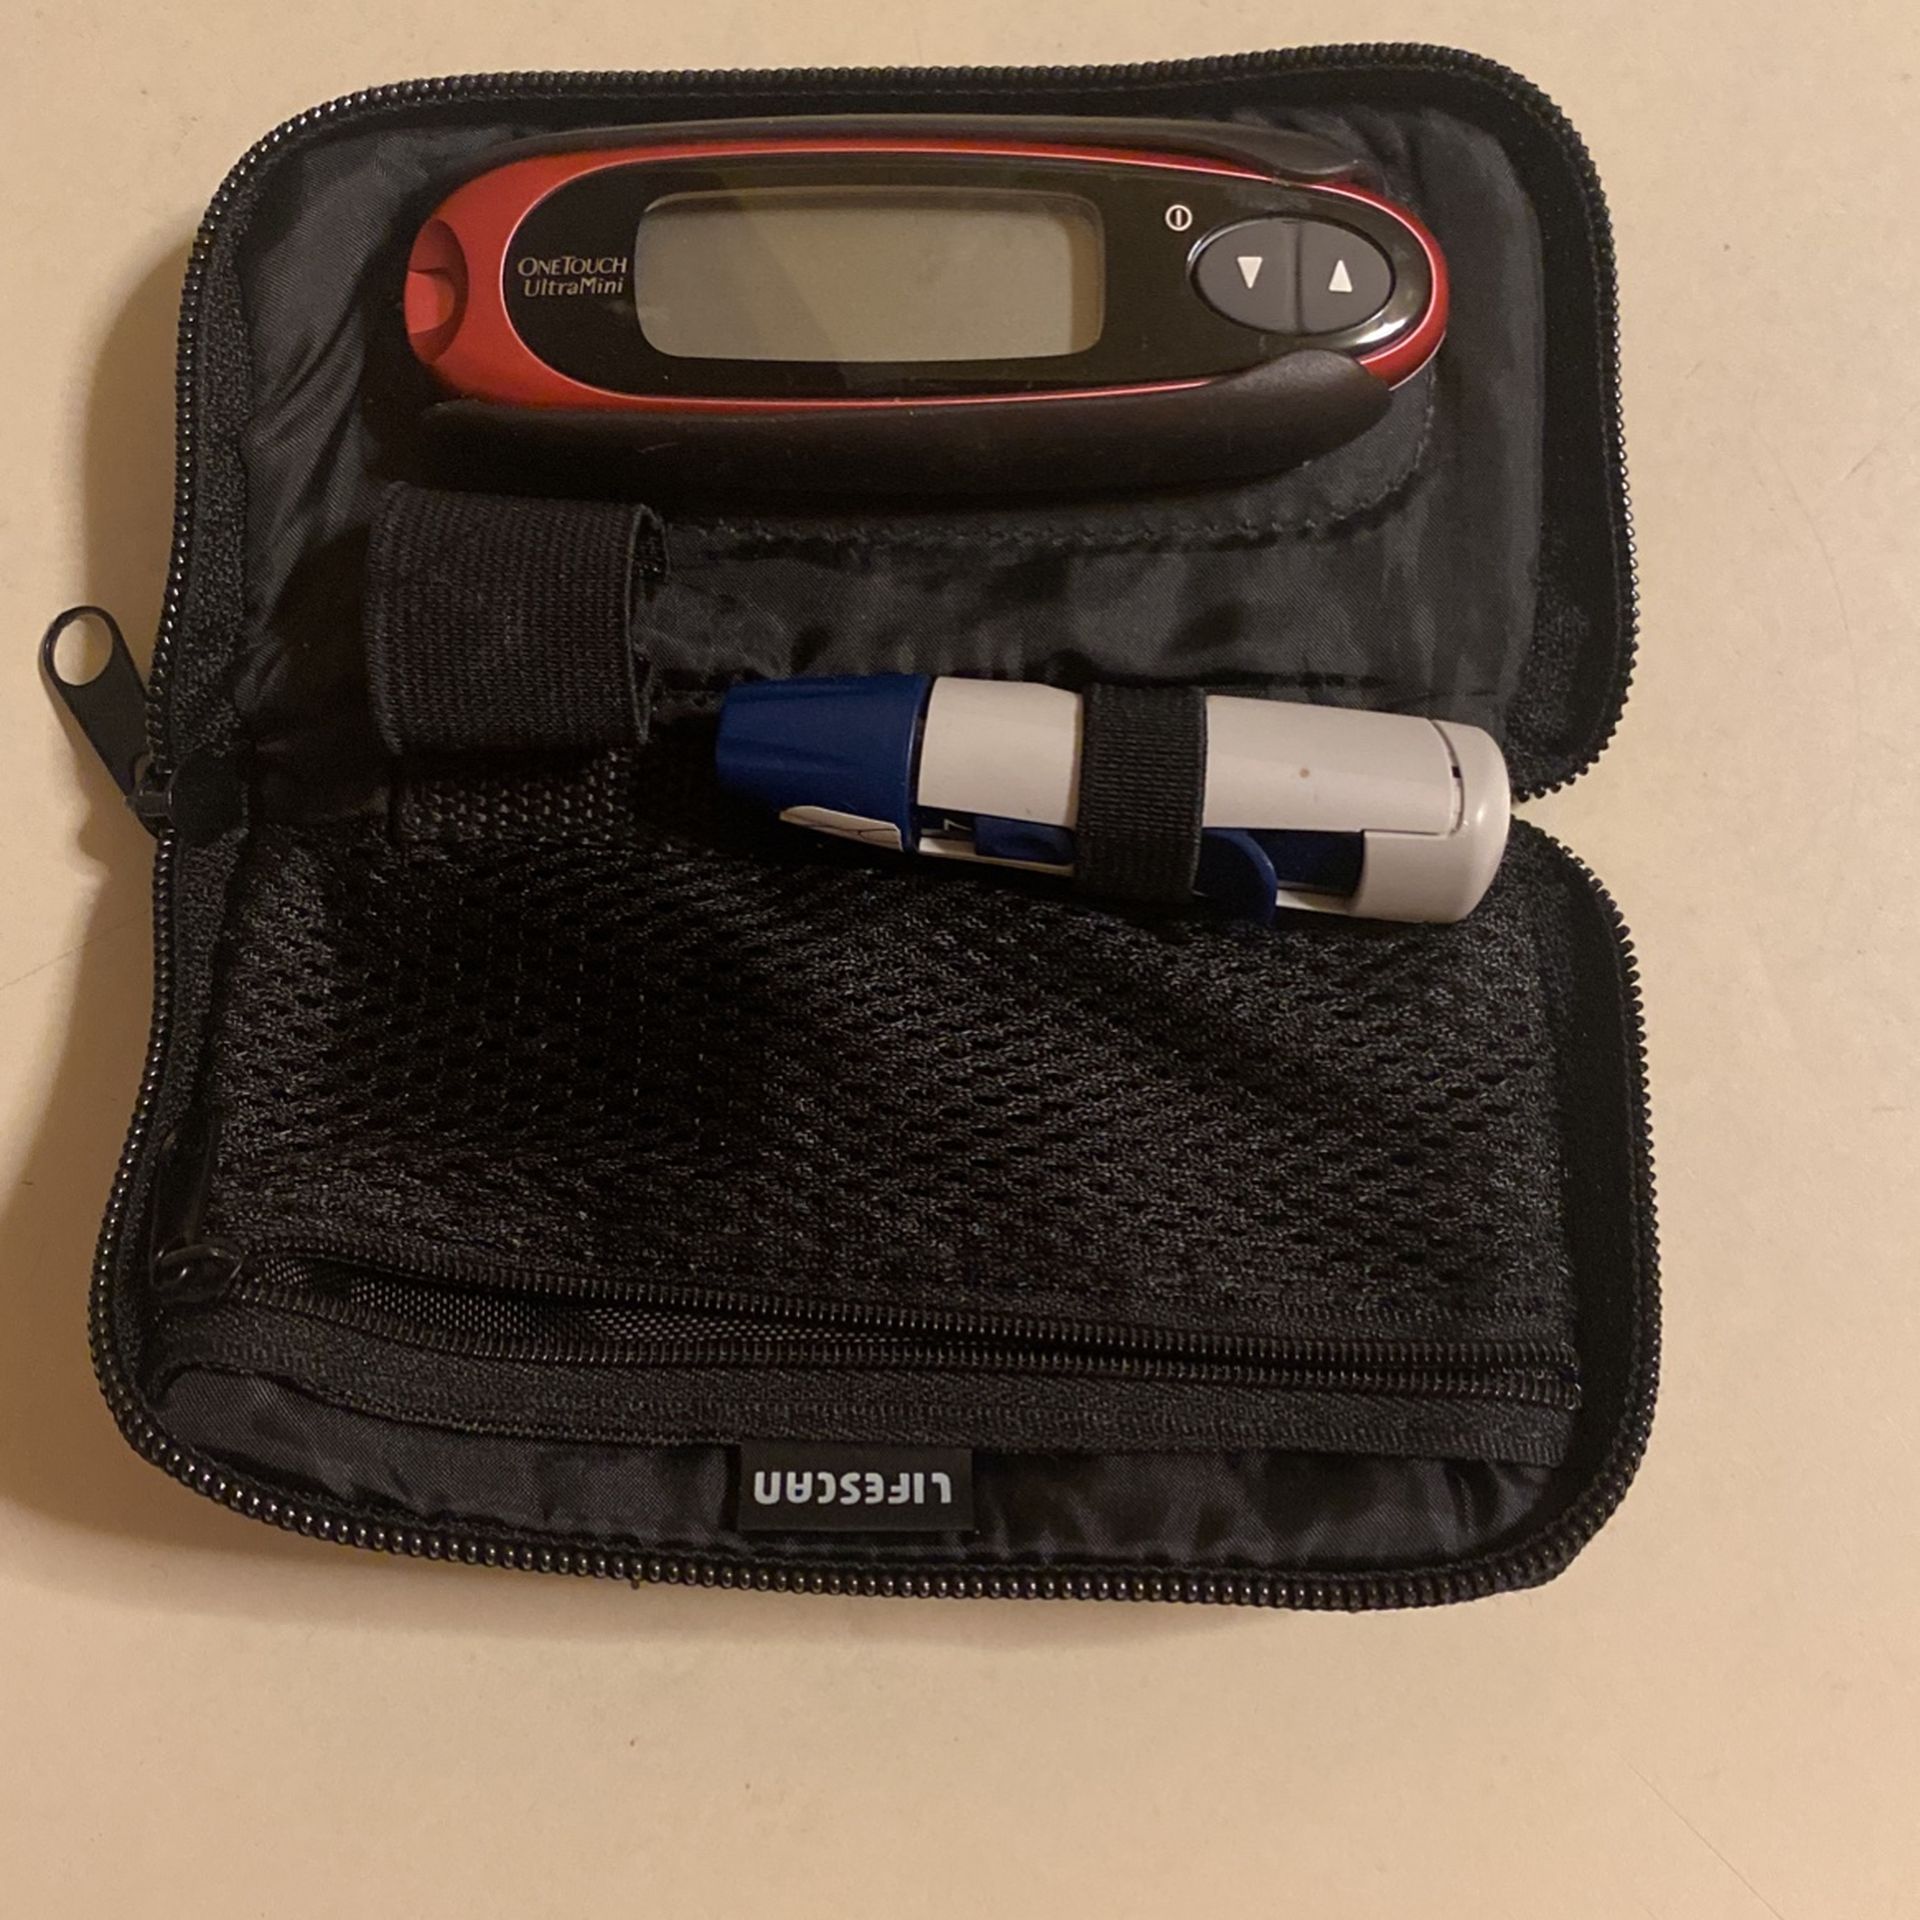 OneTouch Ultra Mini Meter